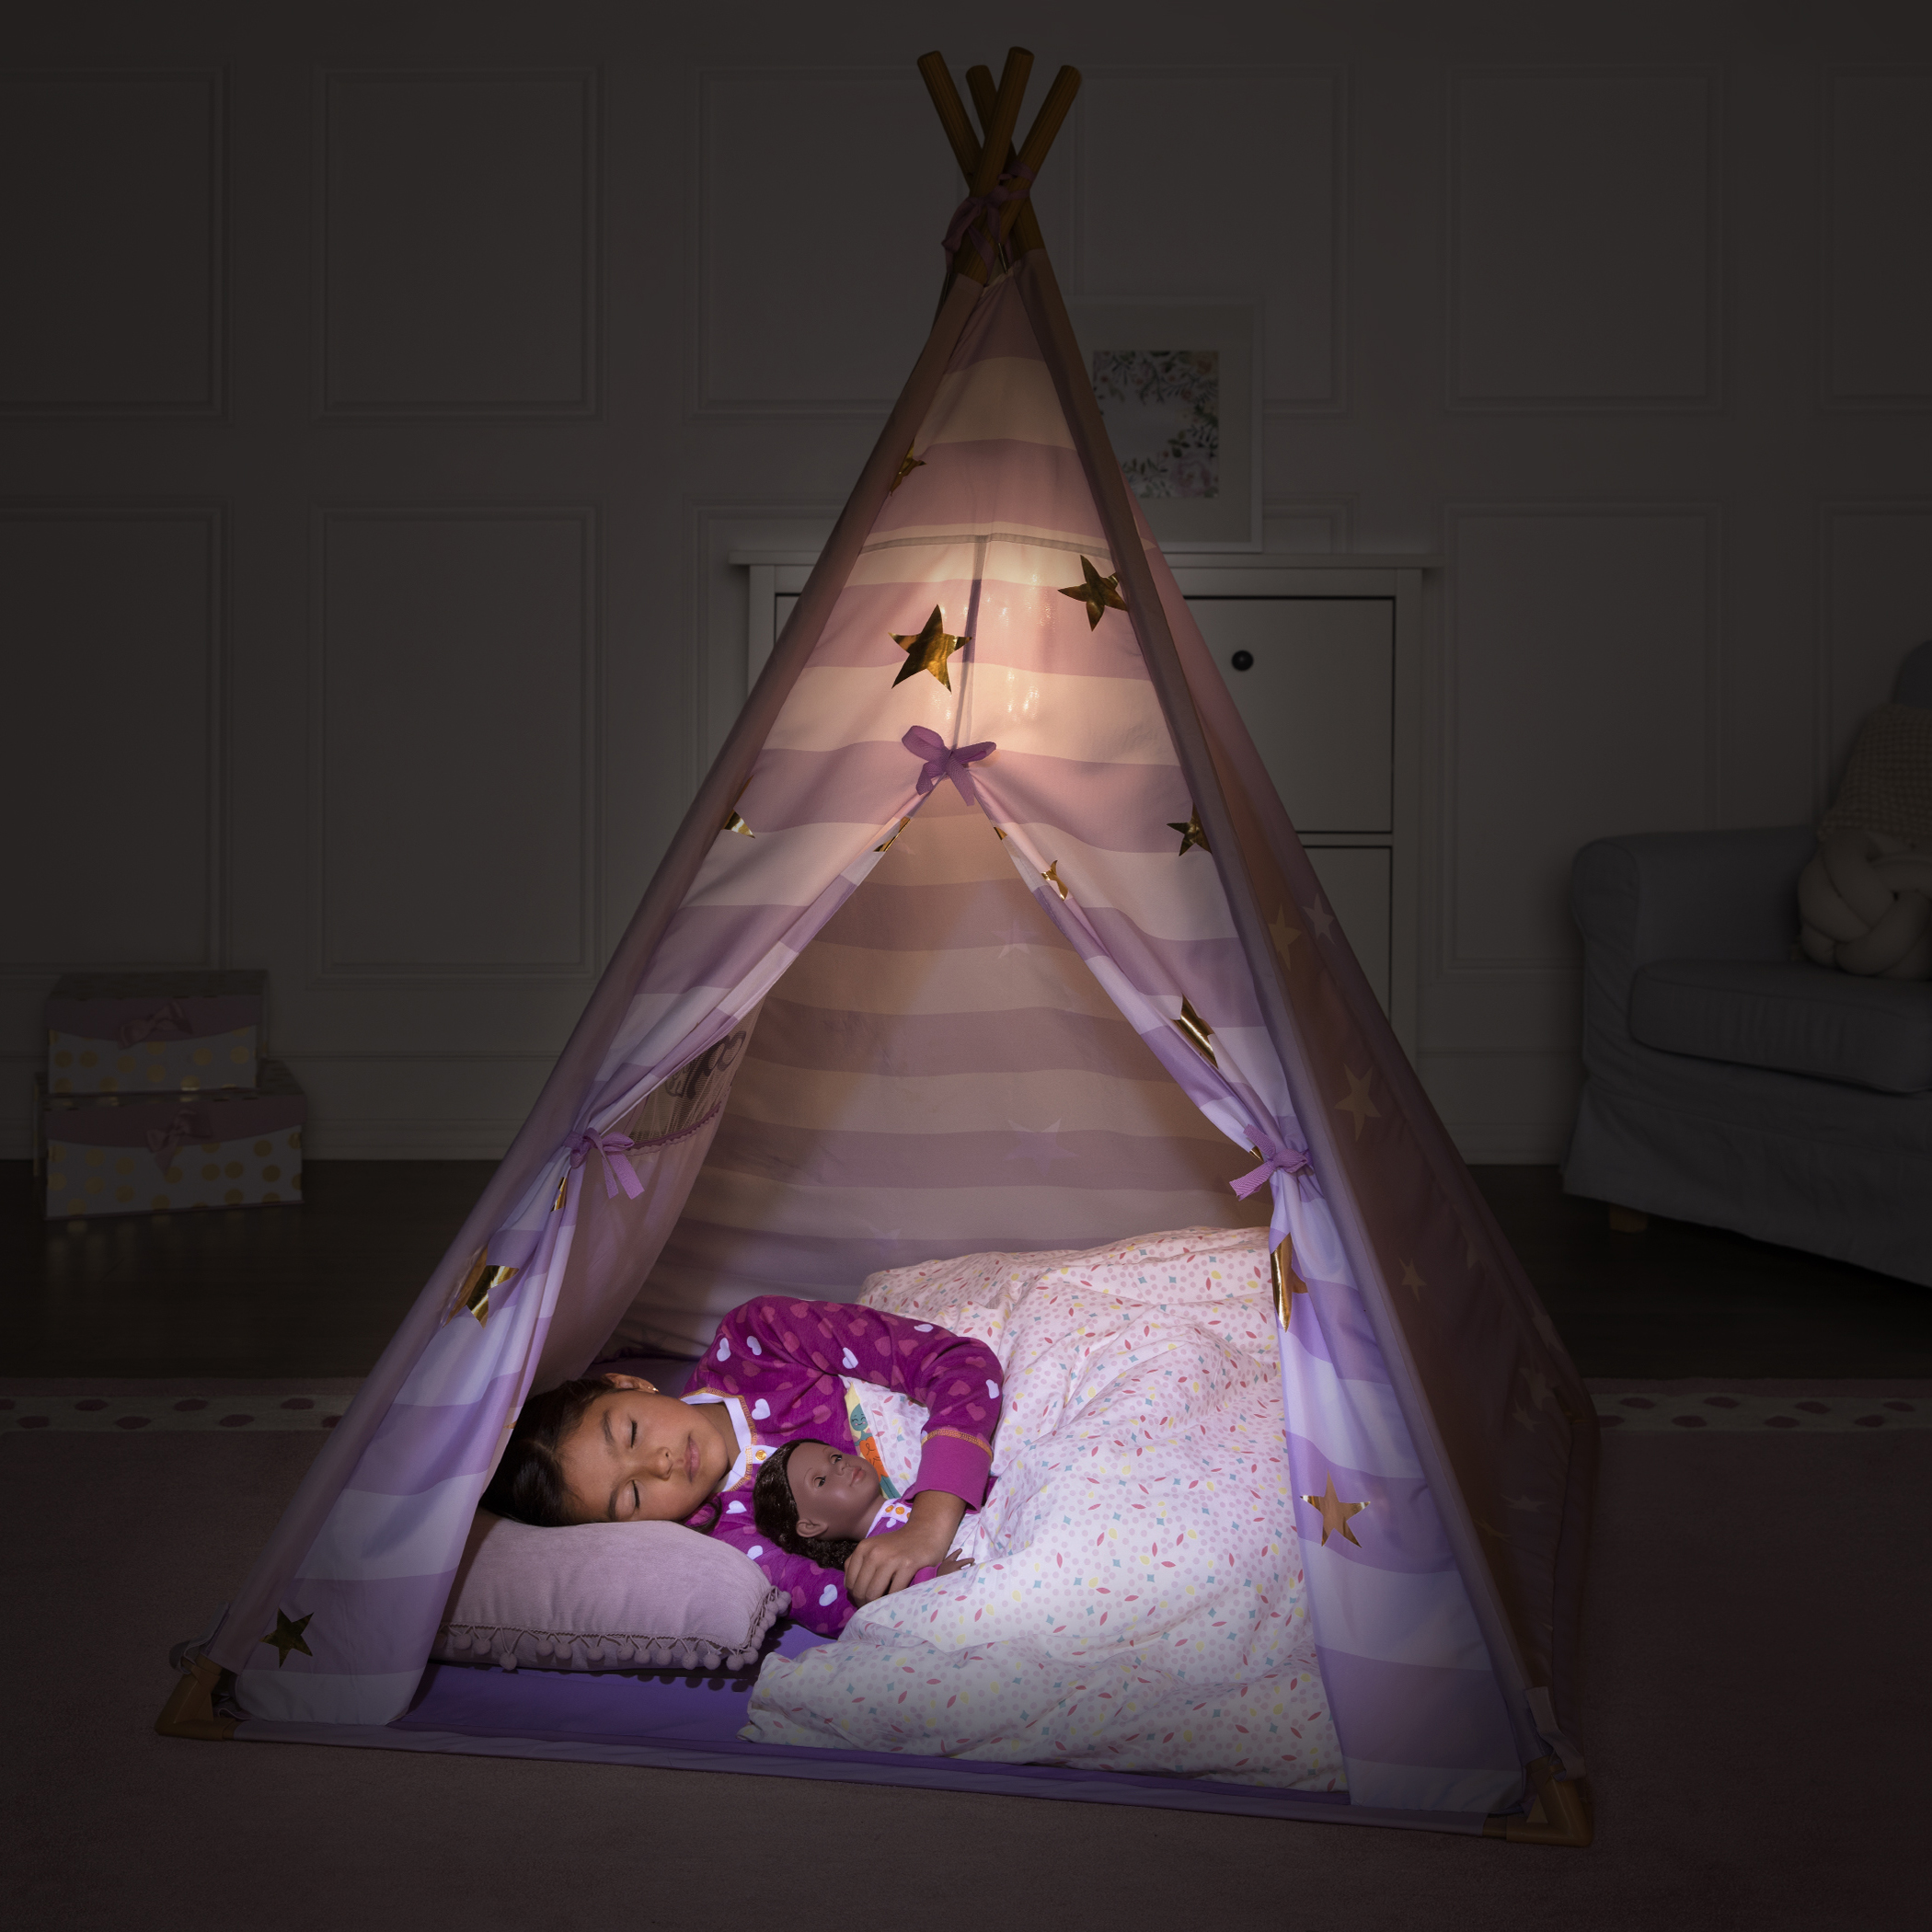 Lilac Suite Teepee little girl sleeping inside with Nahla doll